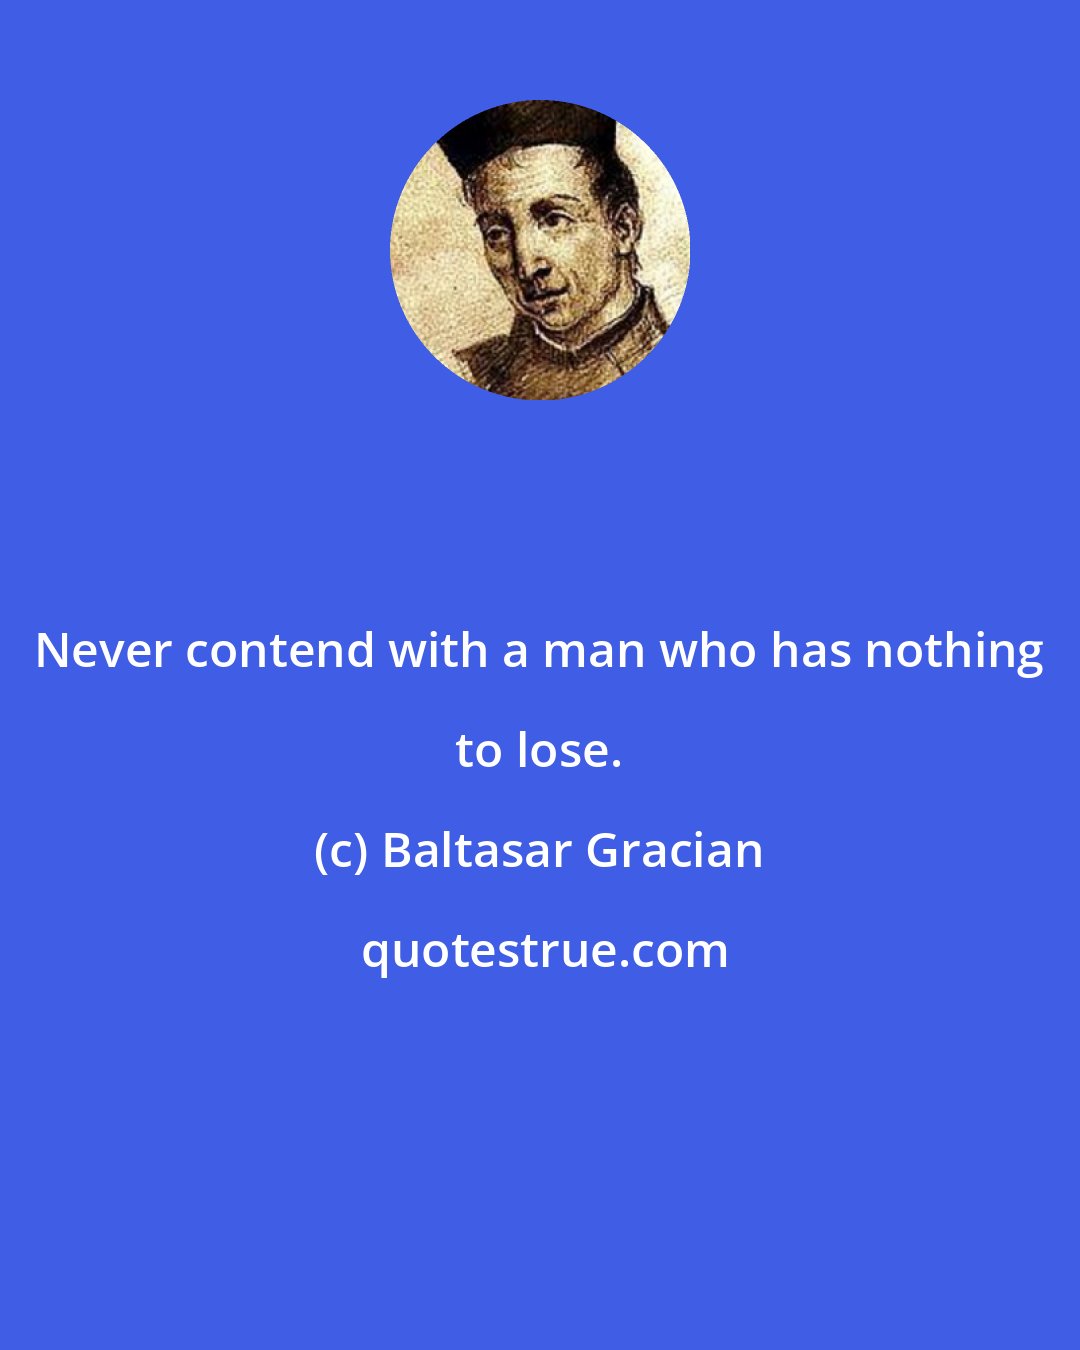 Baltasar Gracian: Never contend with a man who has nothing to lose.